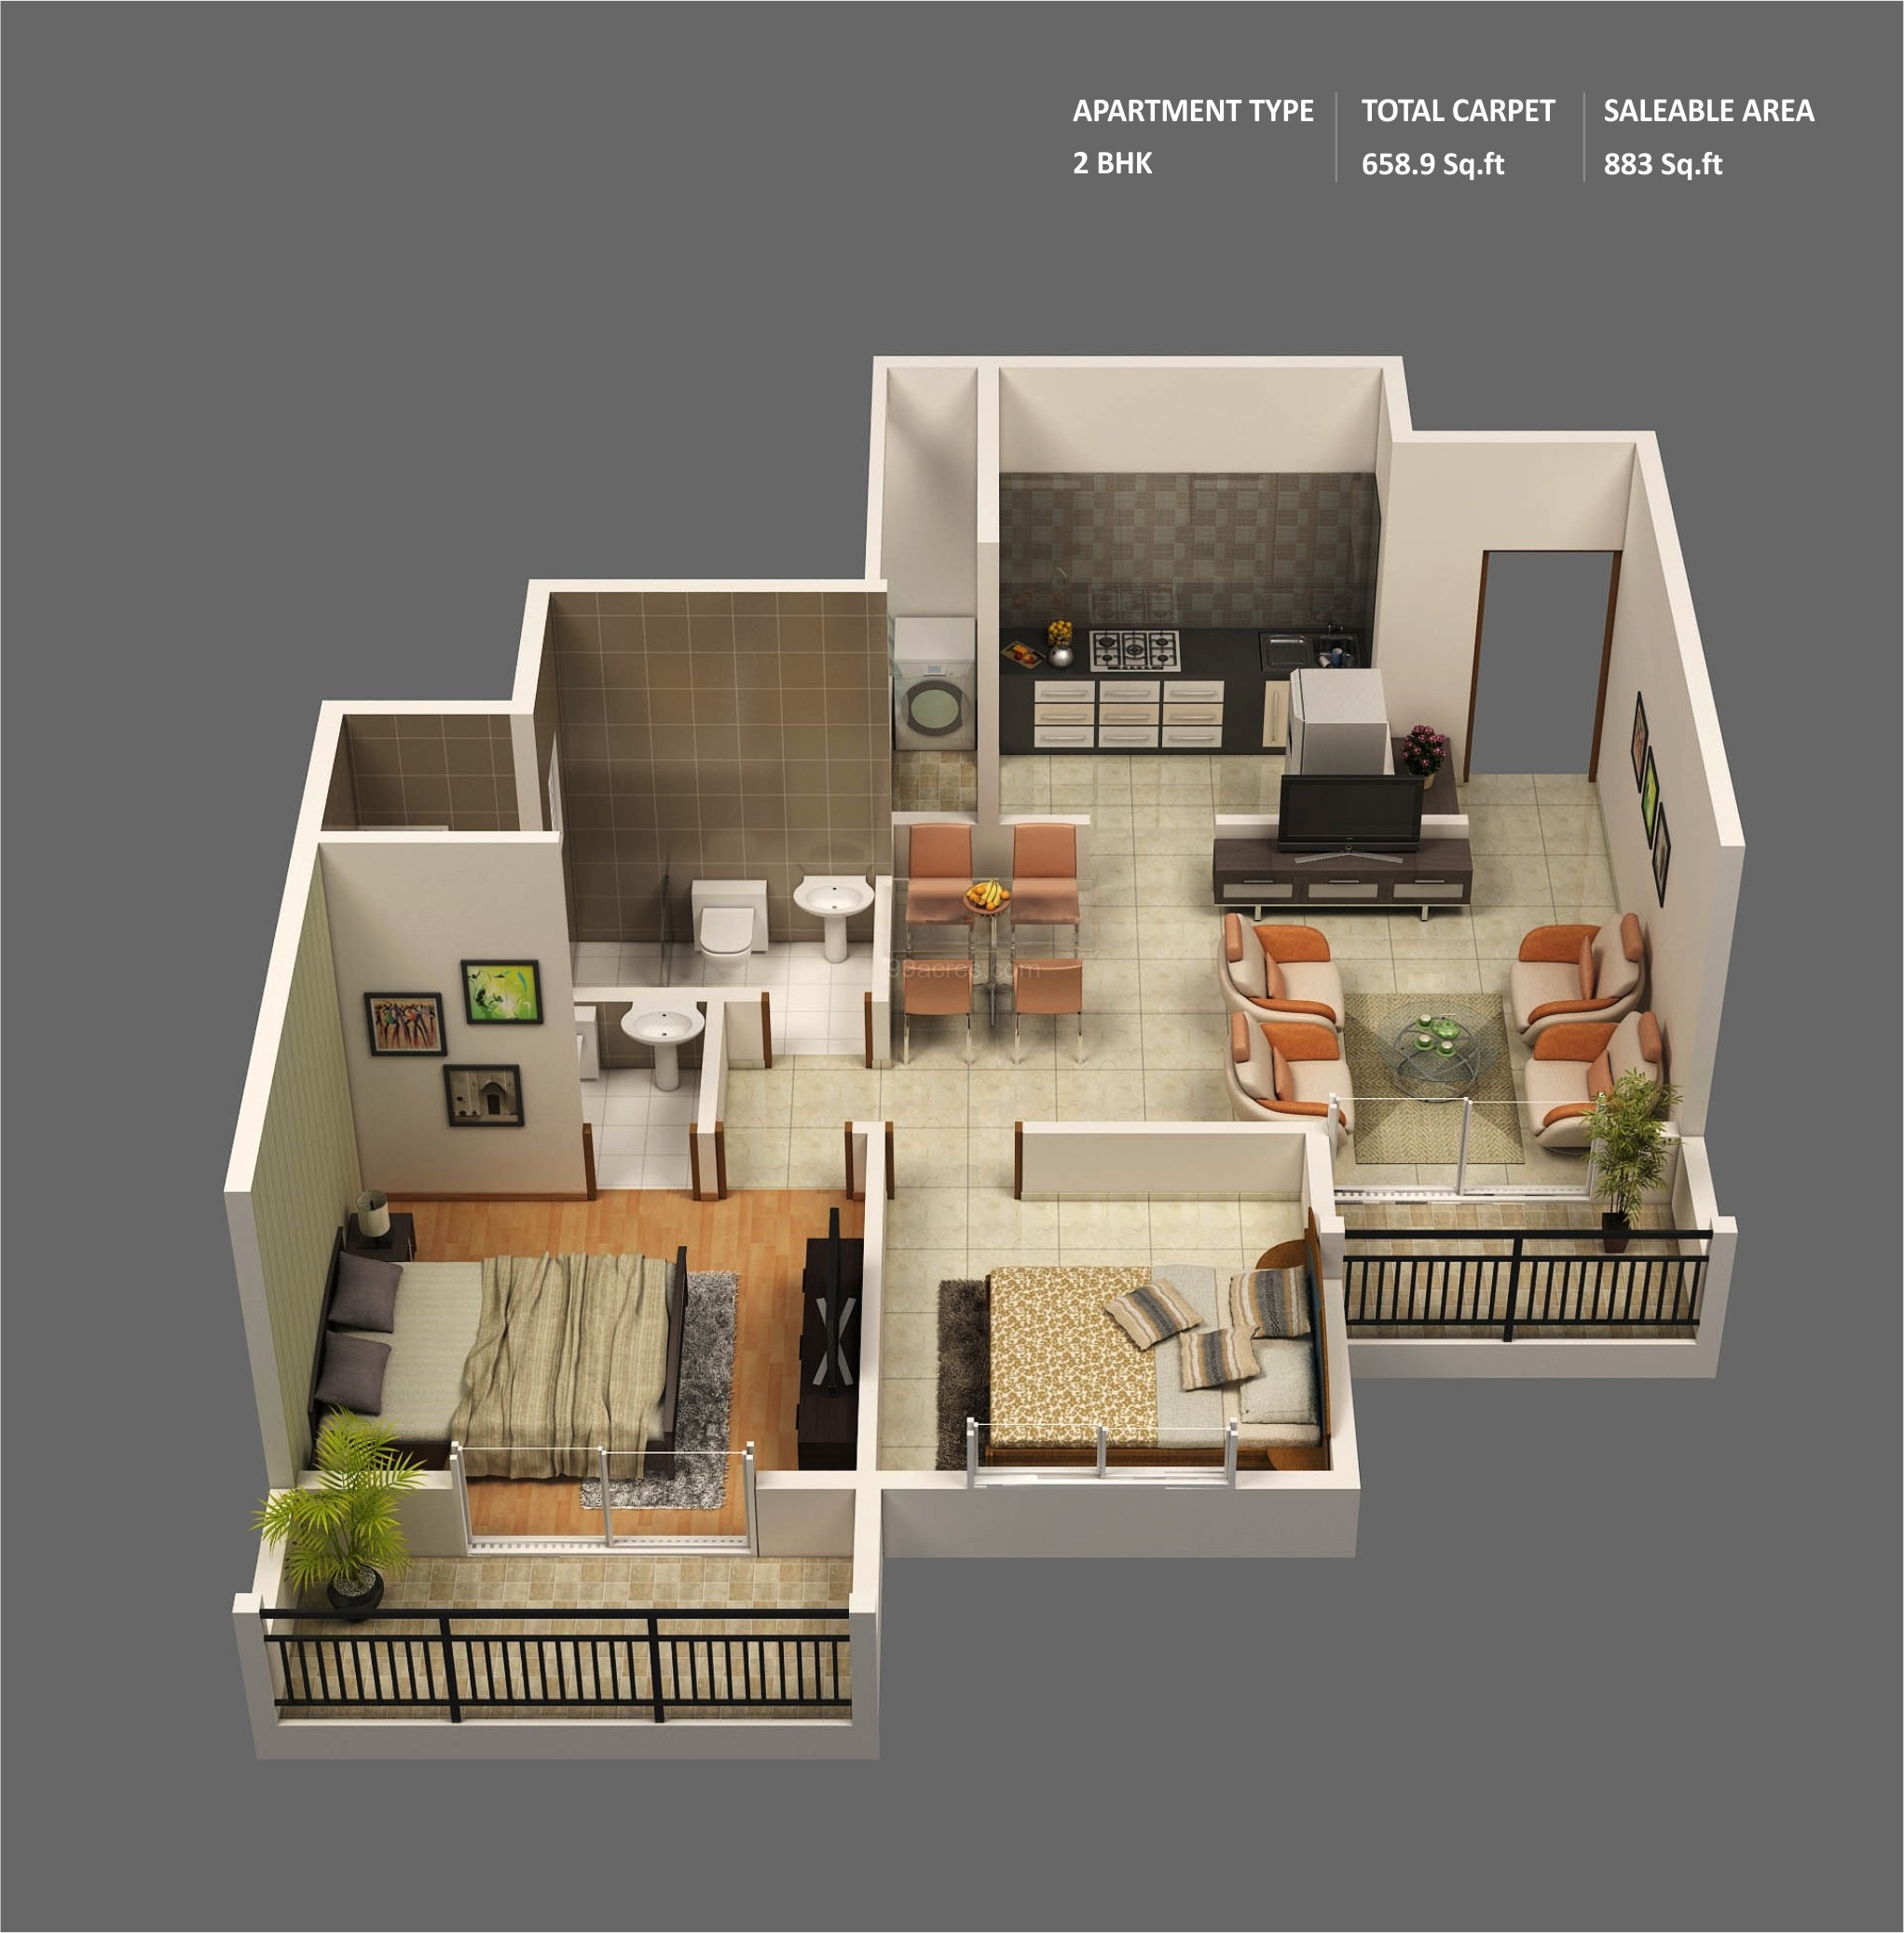 50 Two "2" Bedroom Apartment/House Plans Architecture & Design